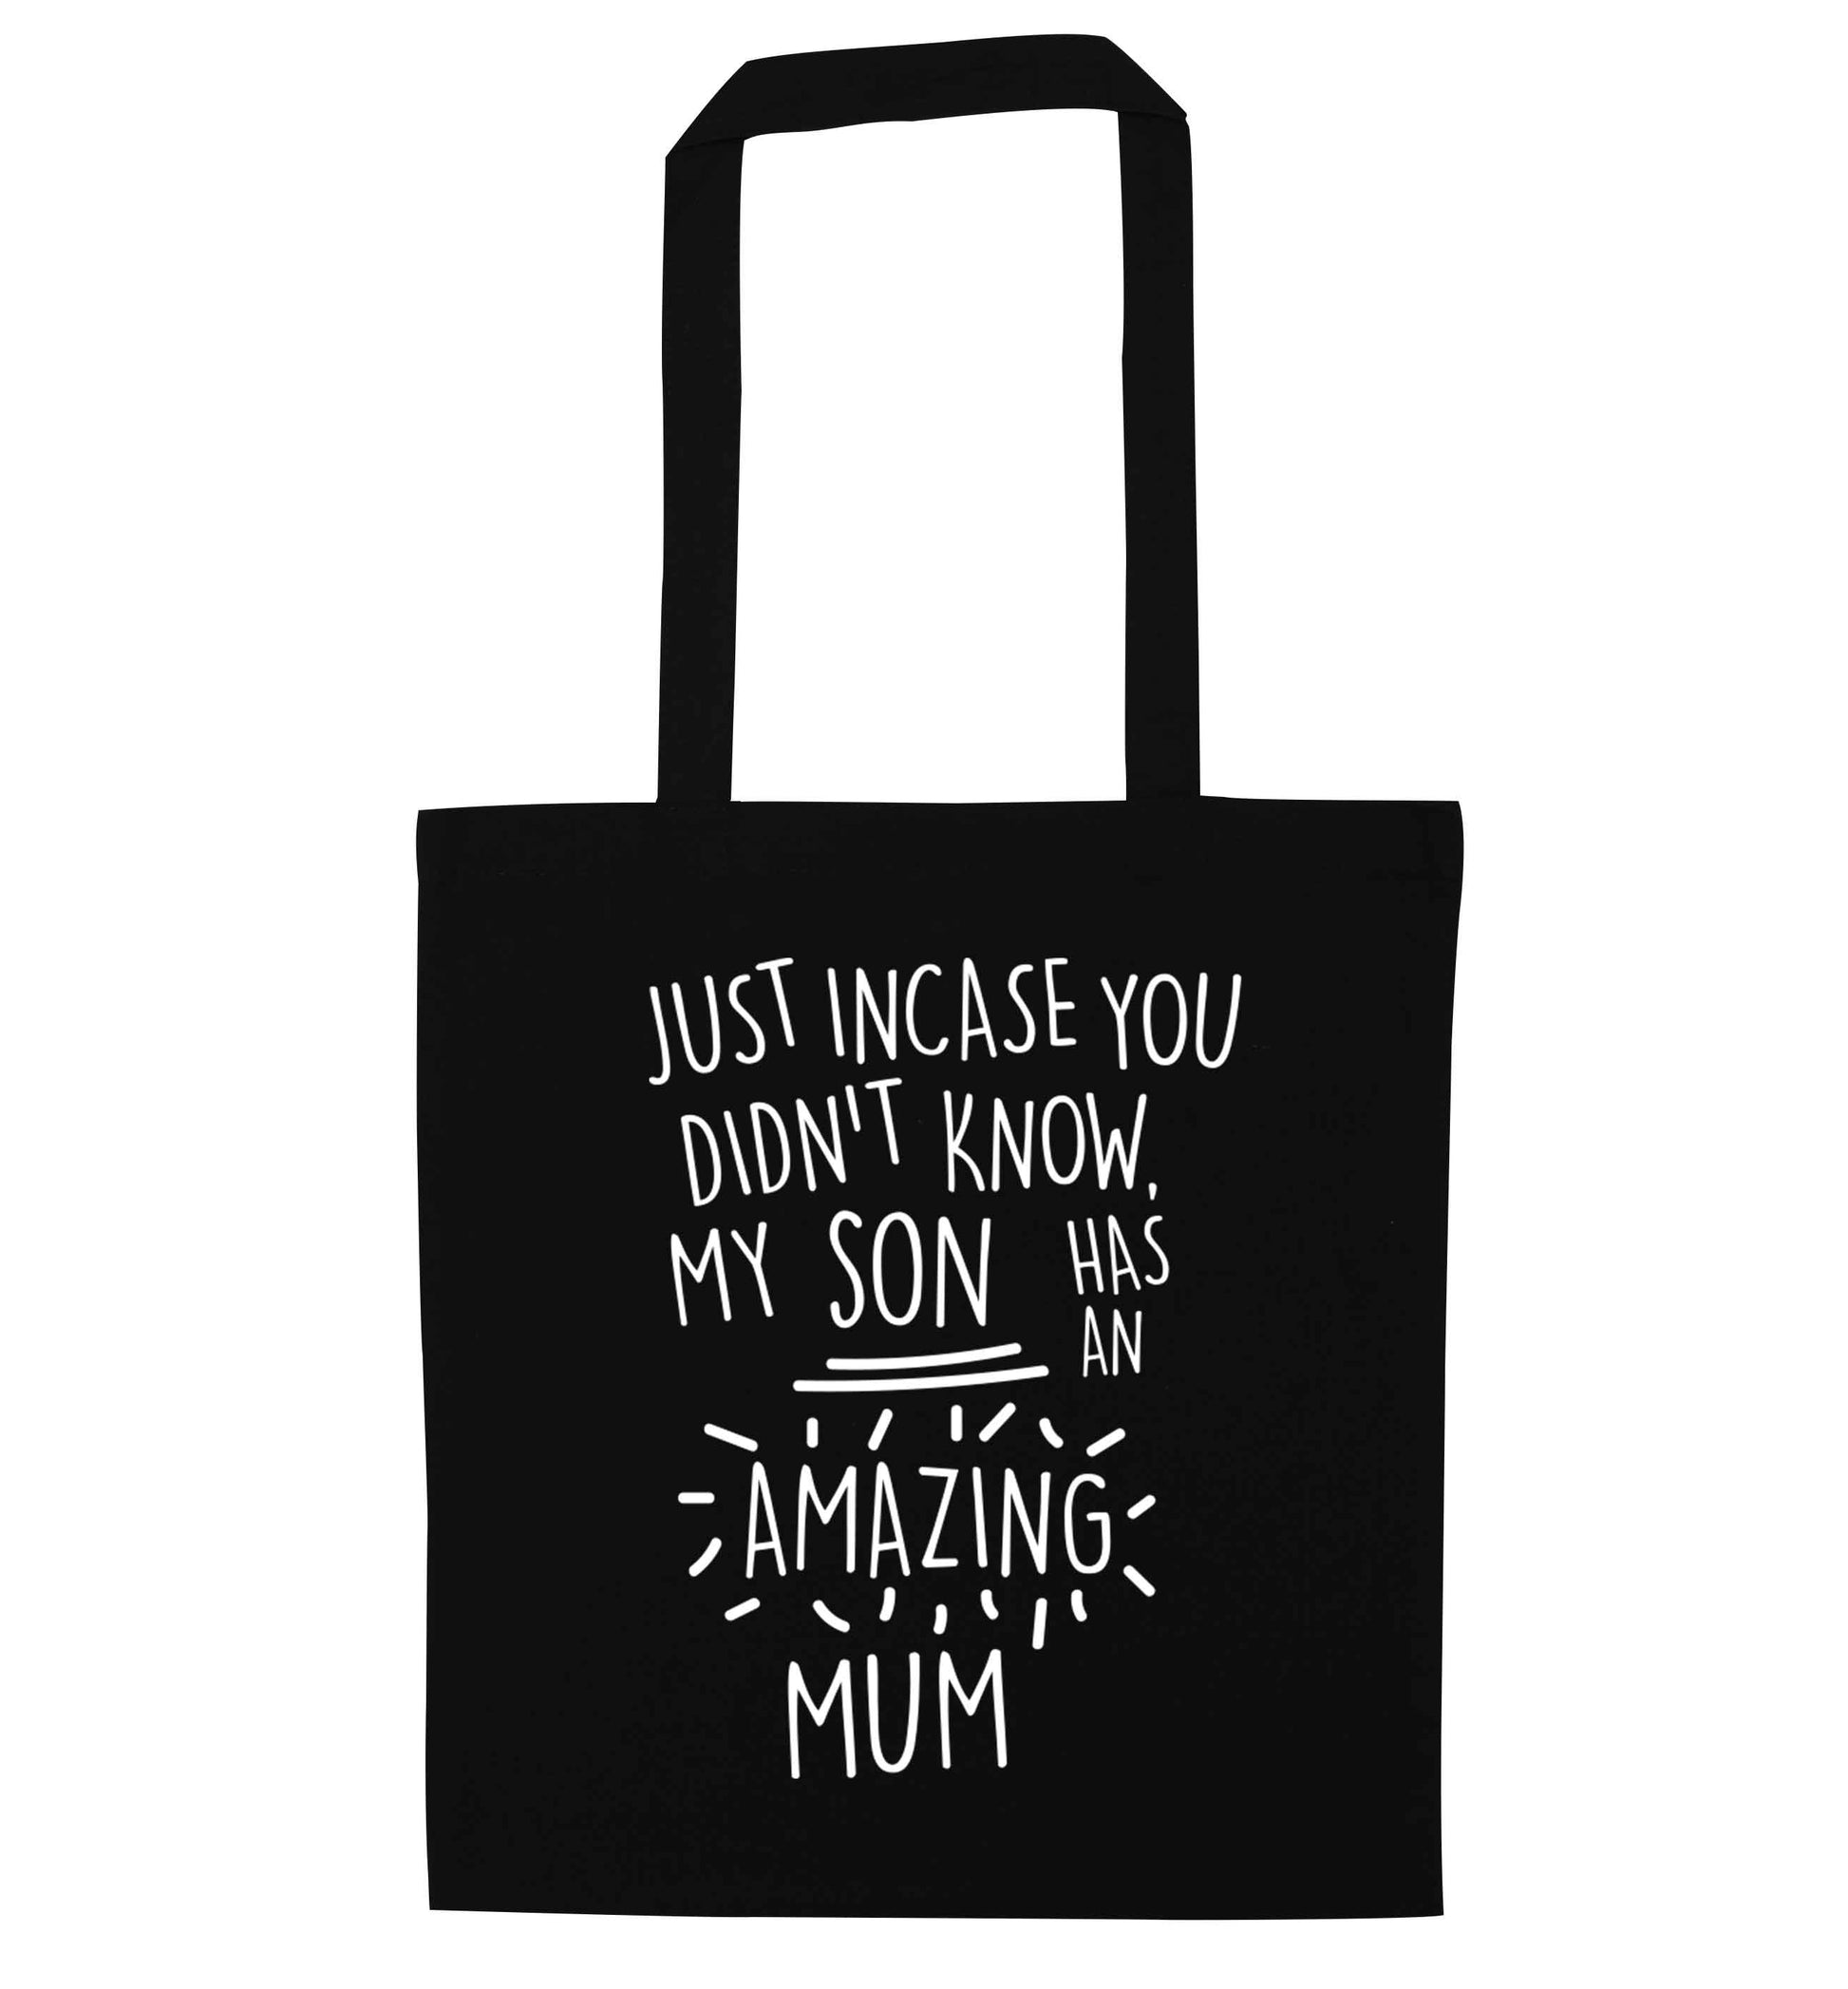 Just incase you didn't know my son has an amazing mum black tote bag